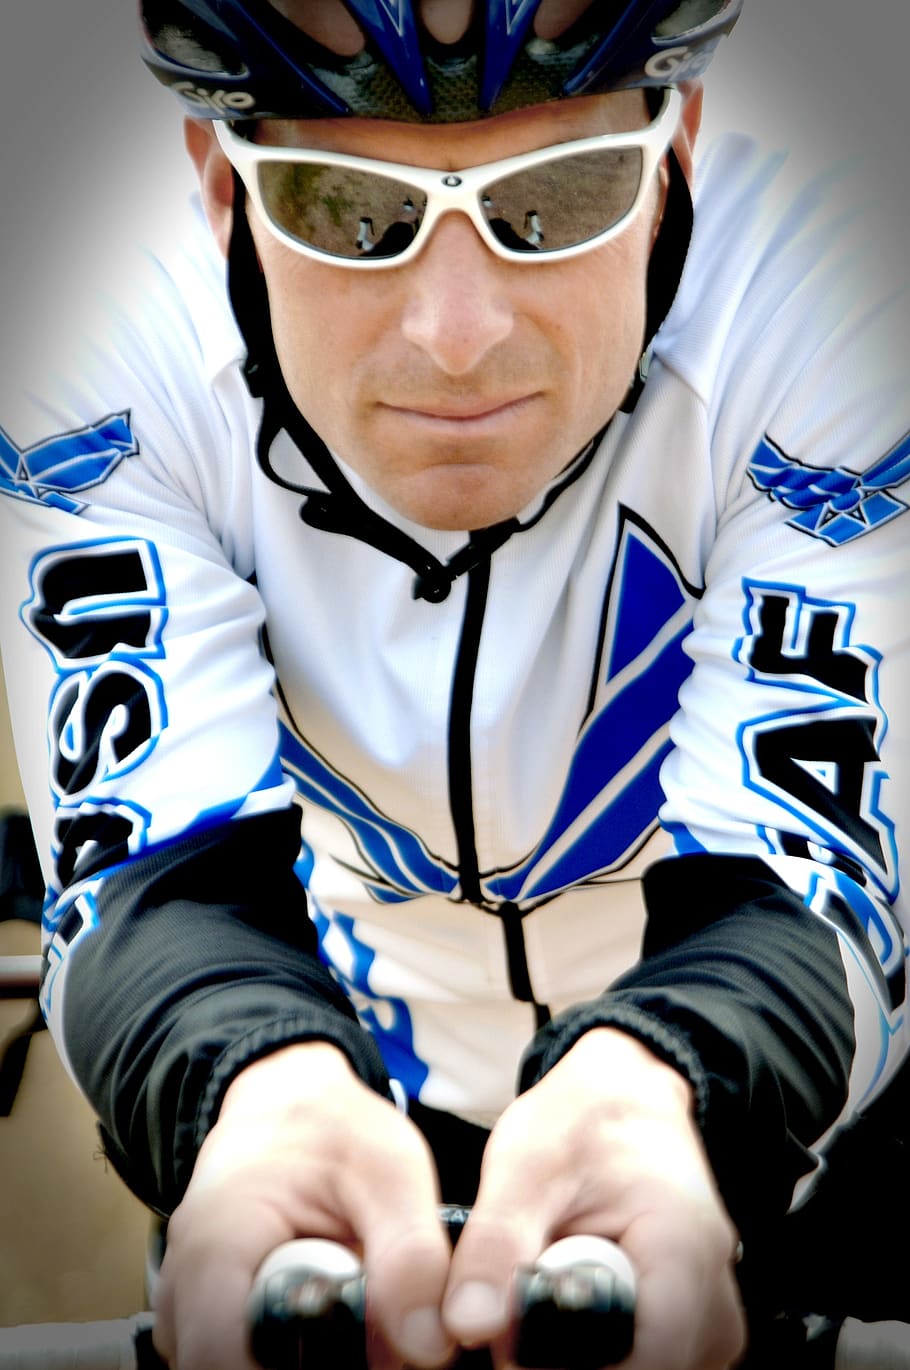 cycling, cyclist, macro, close up, portrait, bicycle, rider, fast, helmet, fitness